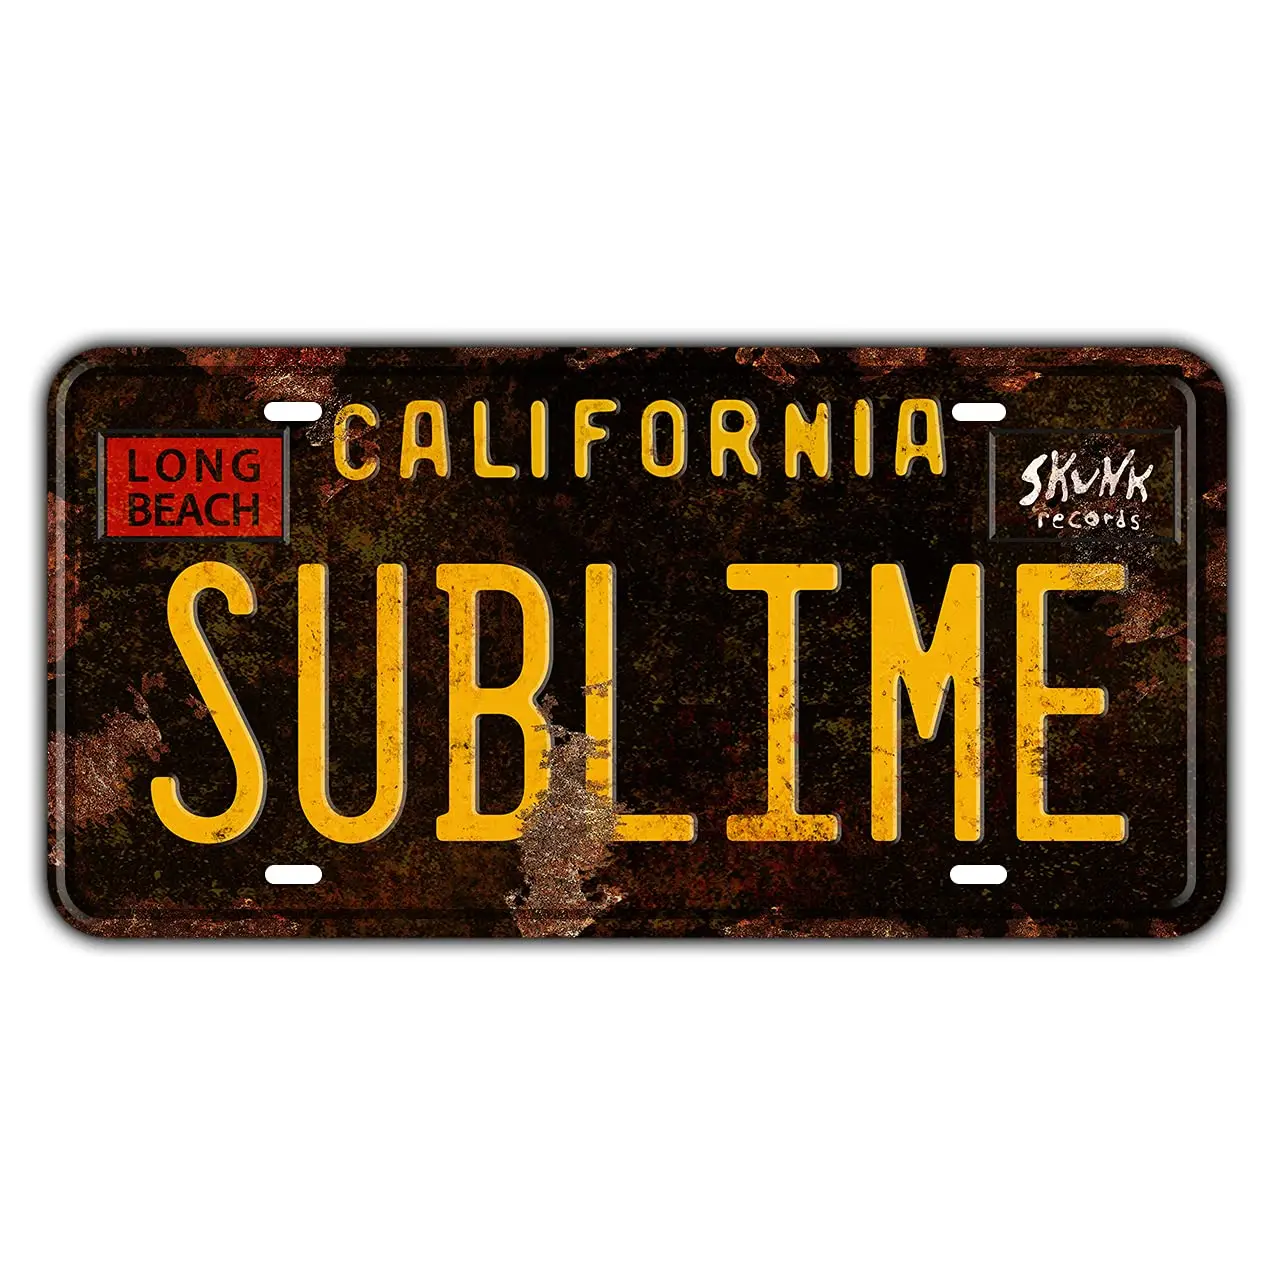 

Embossed Retro Vintage License Plate, US States Historical Tin Sign, Auto Number Tags, 6" X 12"/15x30cm (CA Sublime)